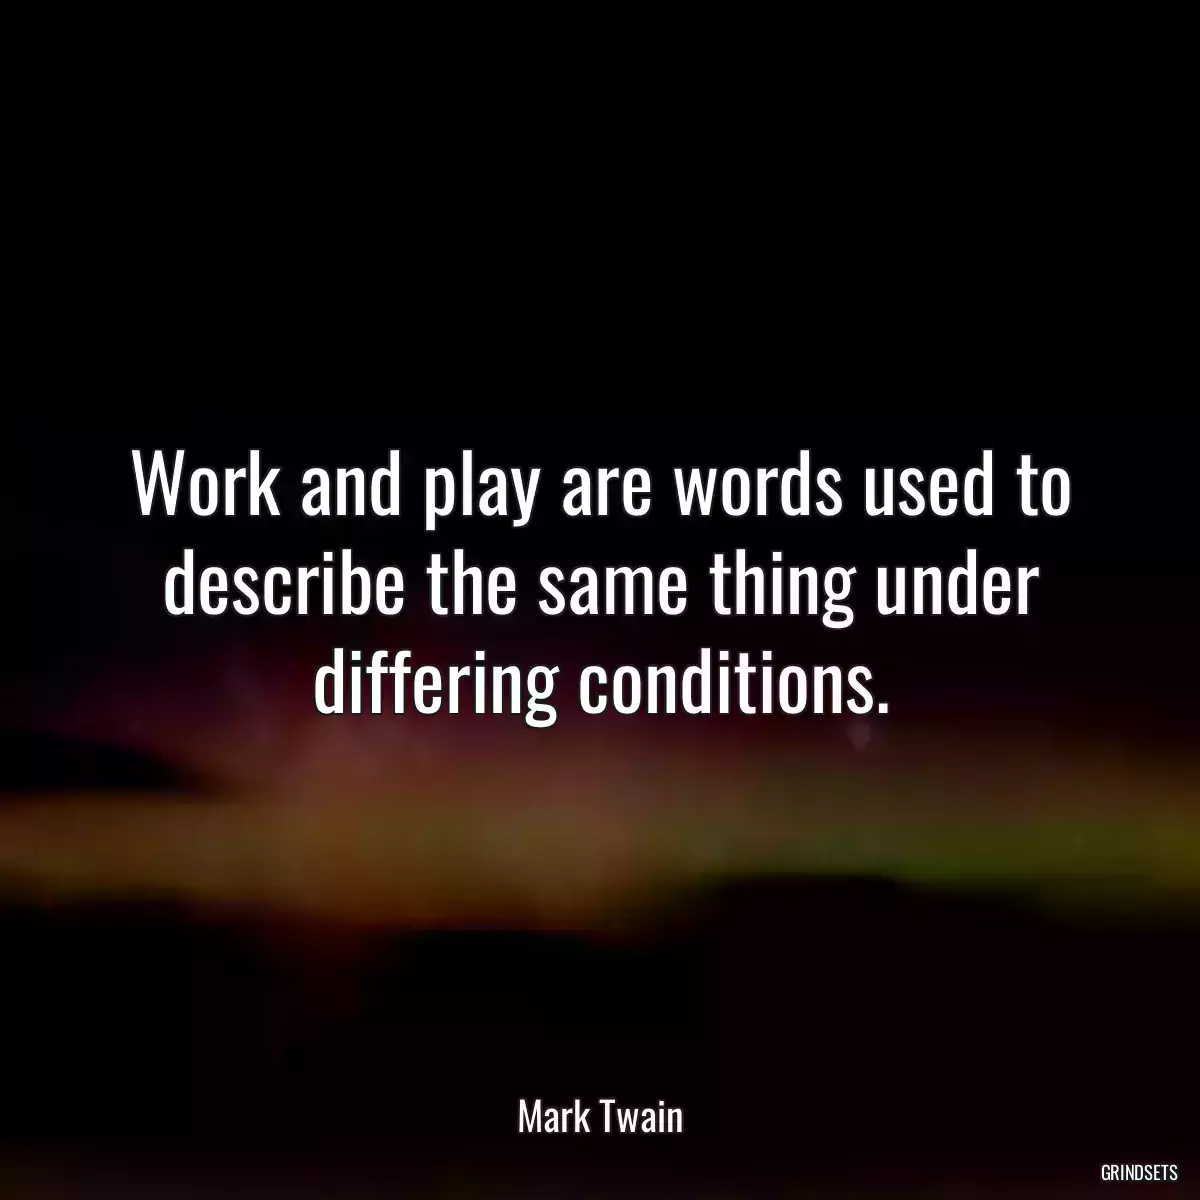 Work and play are words used to describe the same thing under differing conditions.